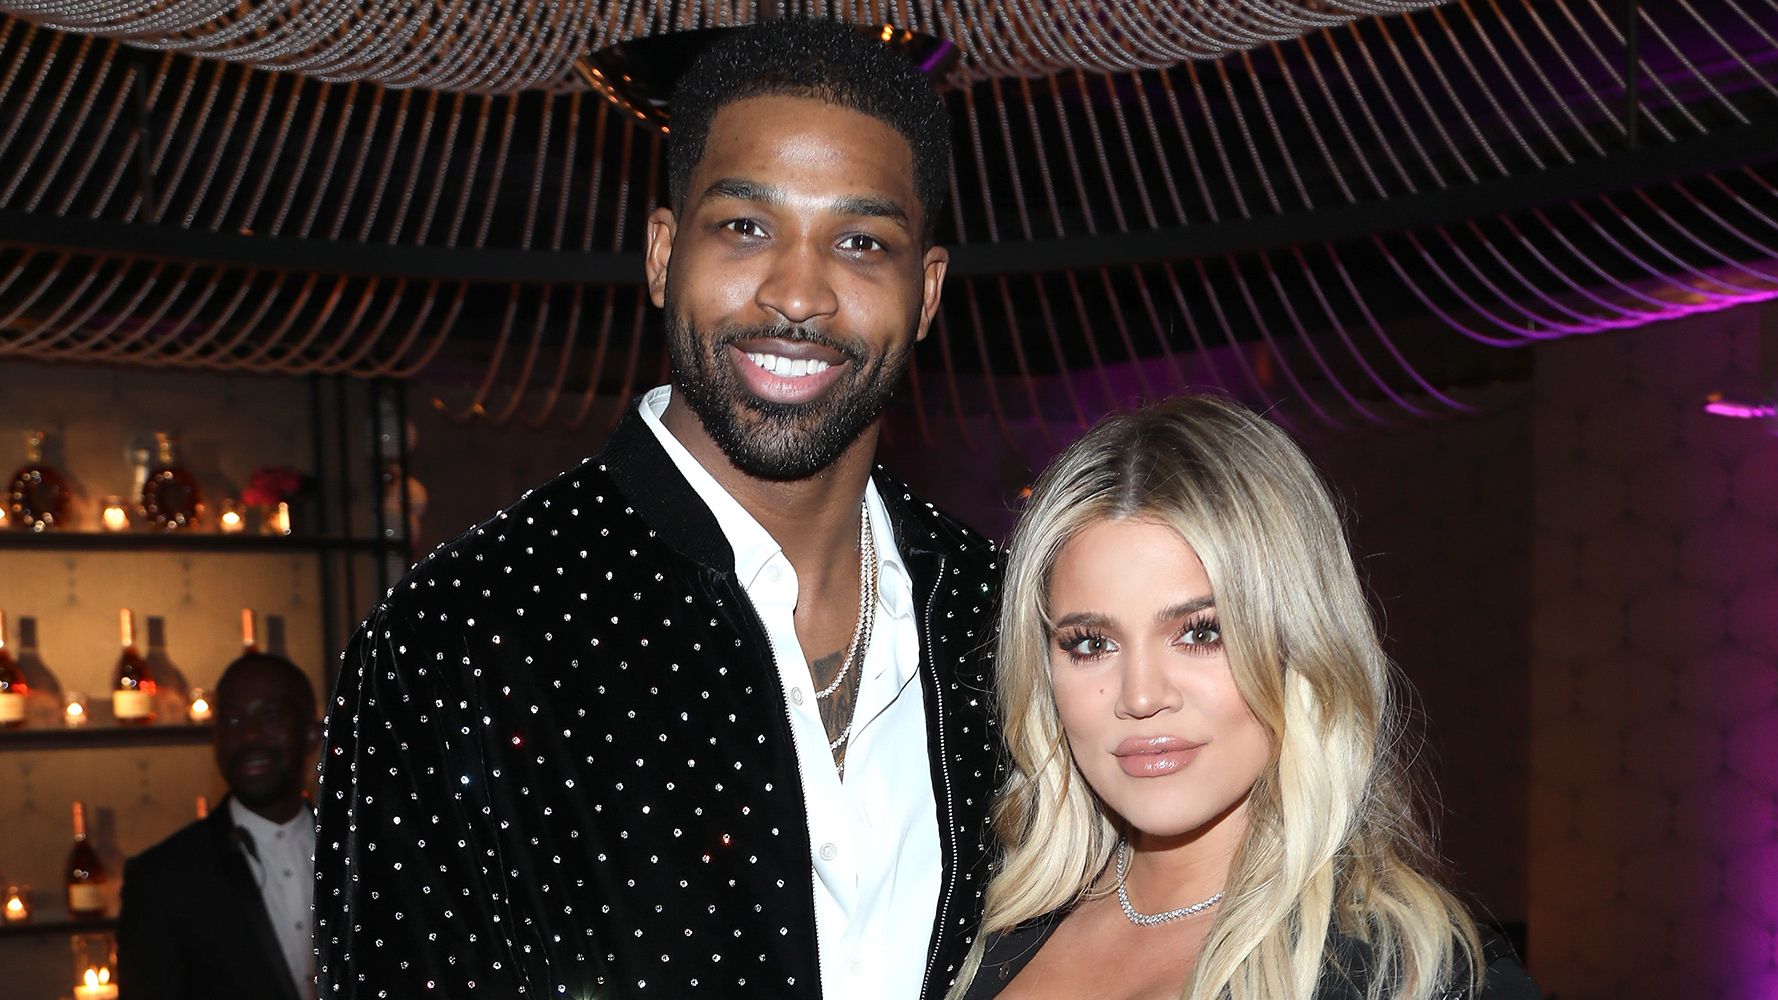 Even though she said she was single, Khloe Kardashian is now dating a private equity investor.